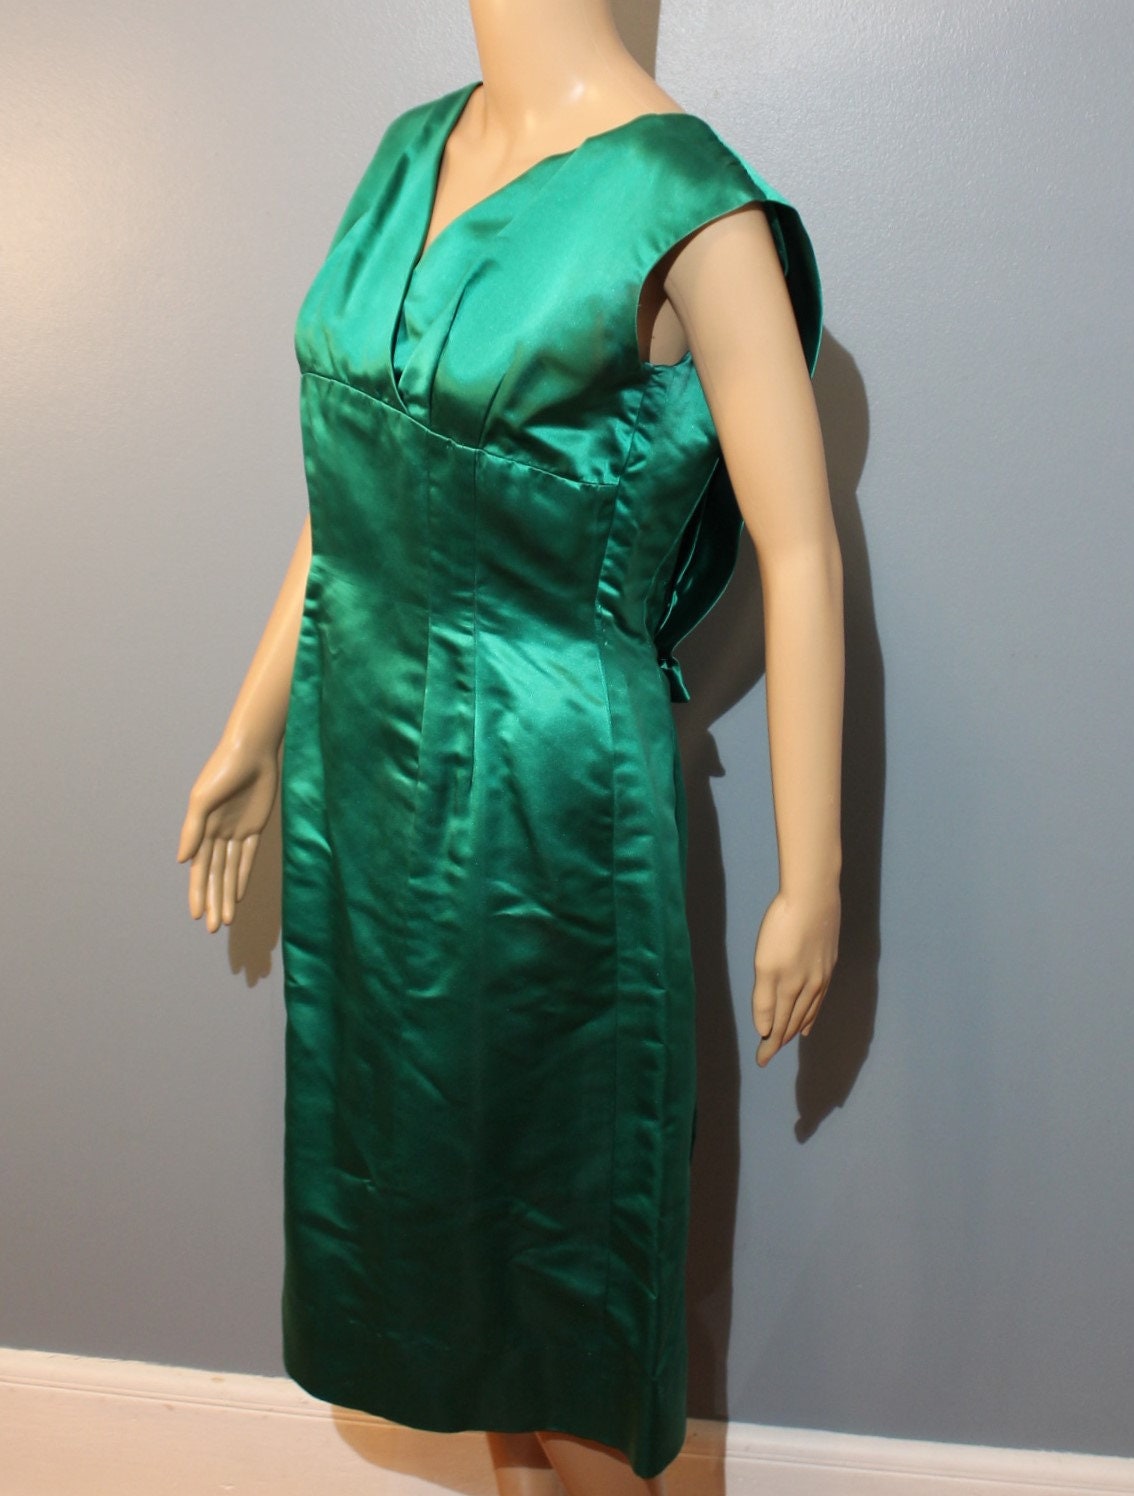 Vintage 1940s-1950s Hand Tailored Green Satin Cocktail Dress - Etsy